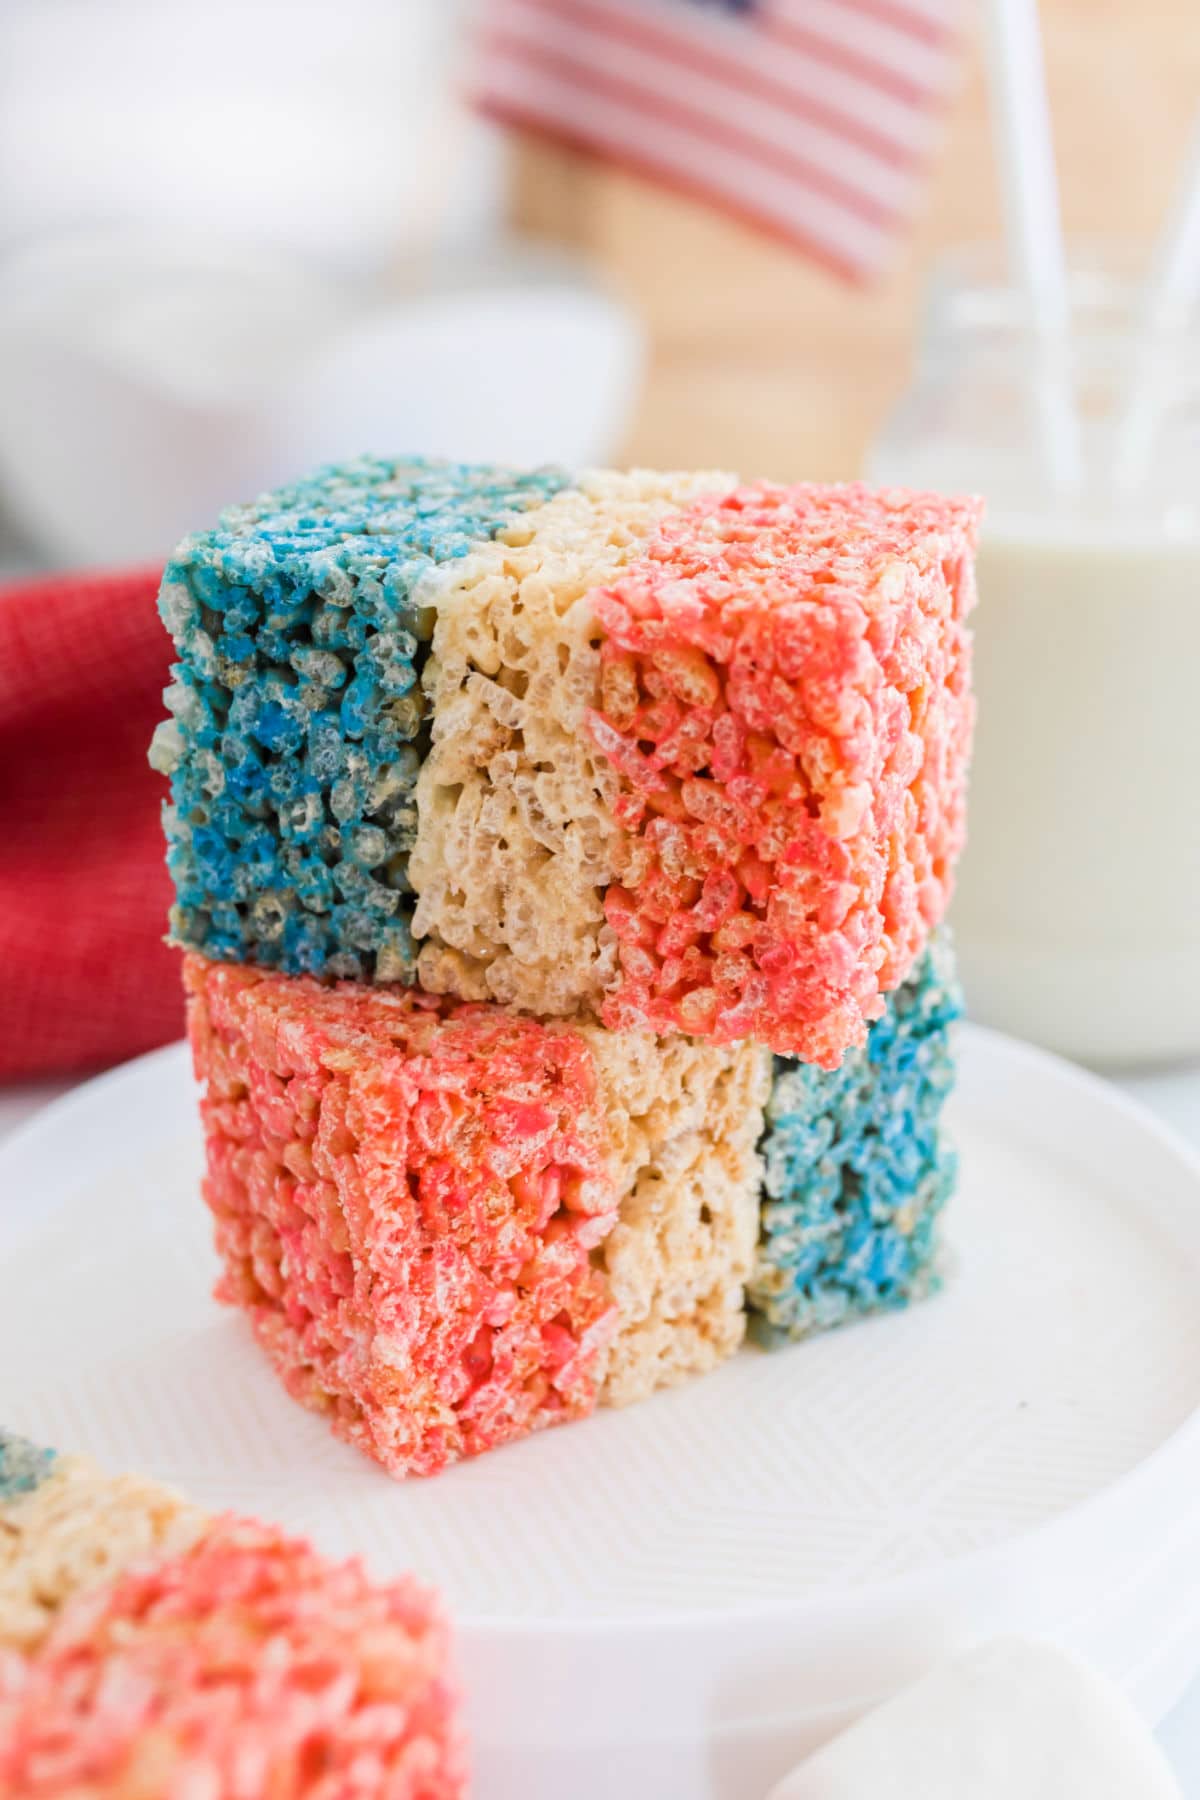 Two red white and blue rice krispies treats stack on each other on a white plate.